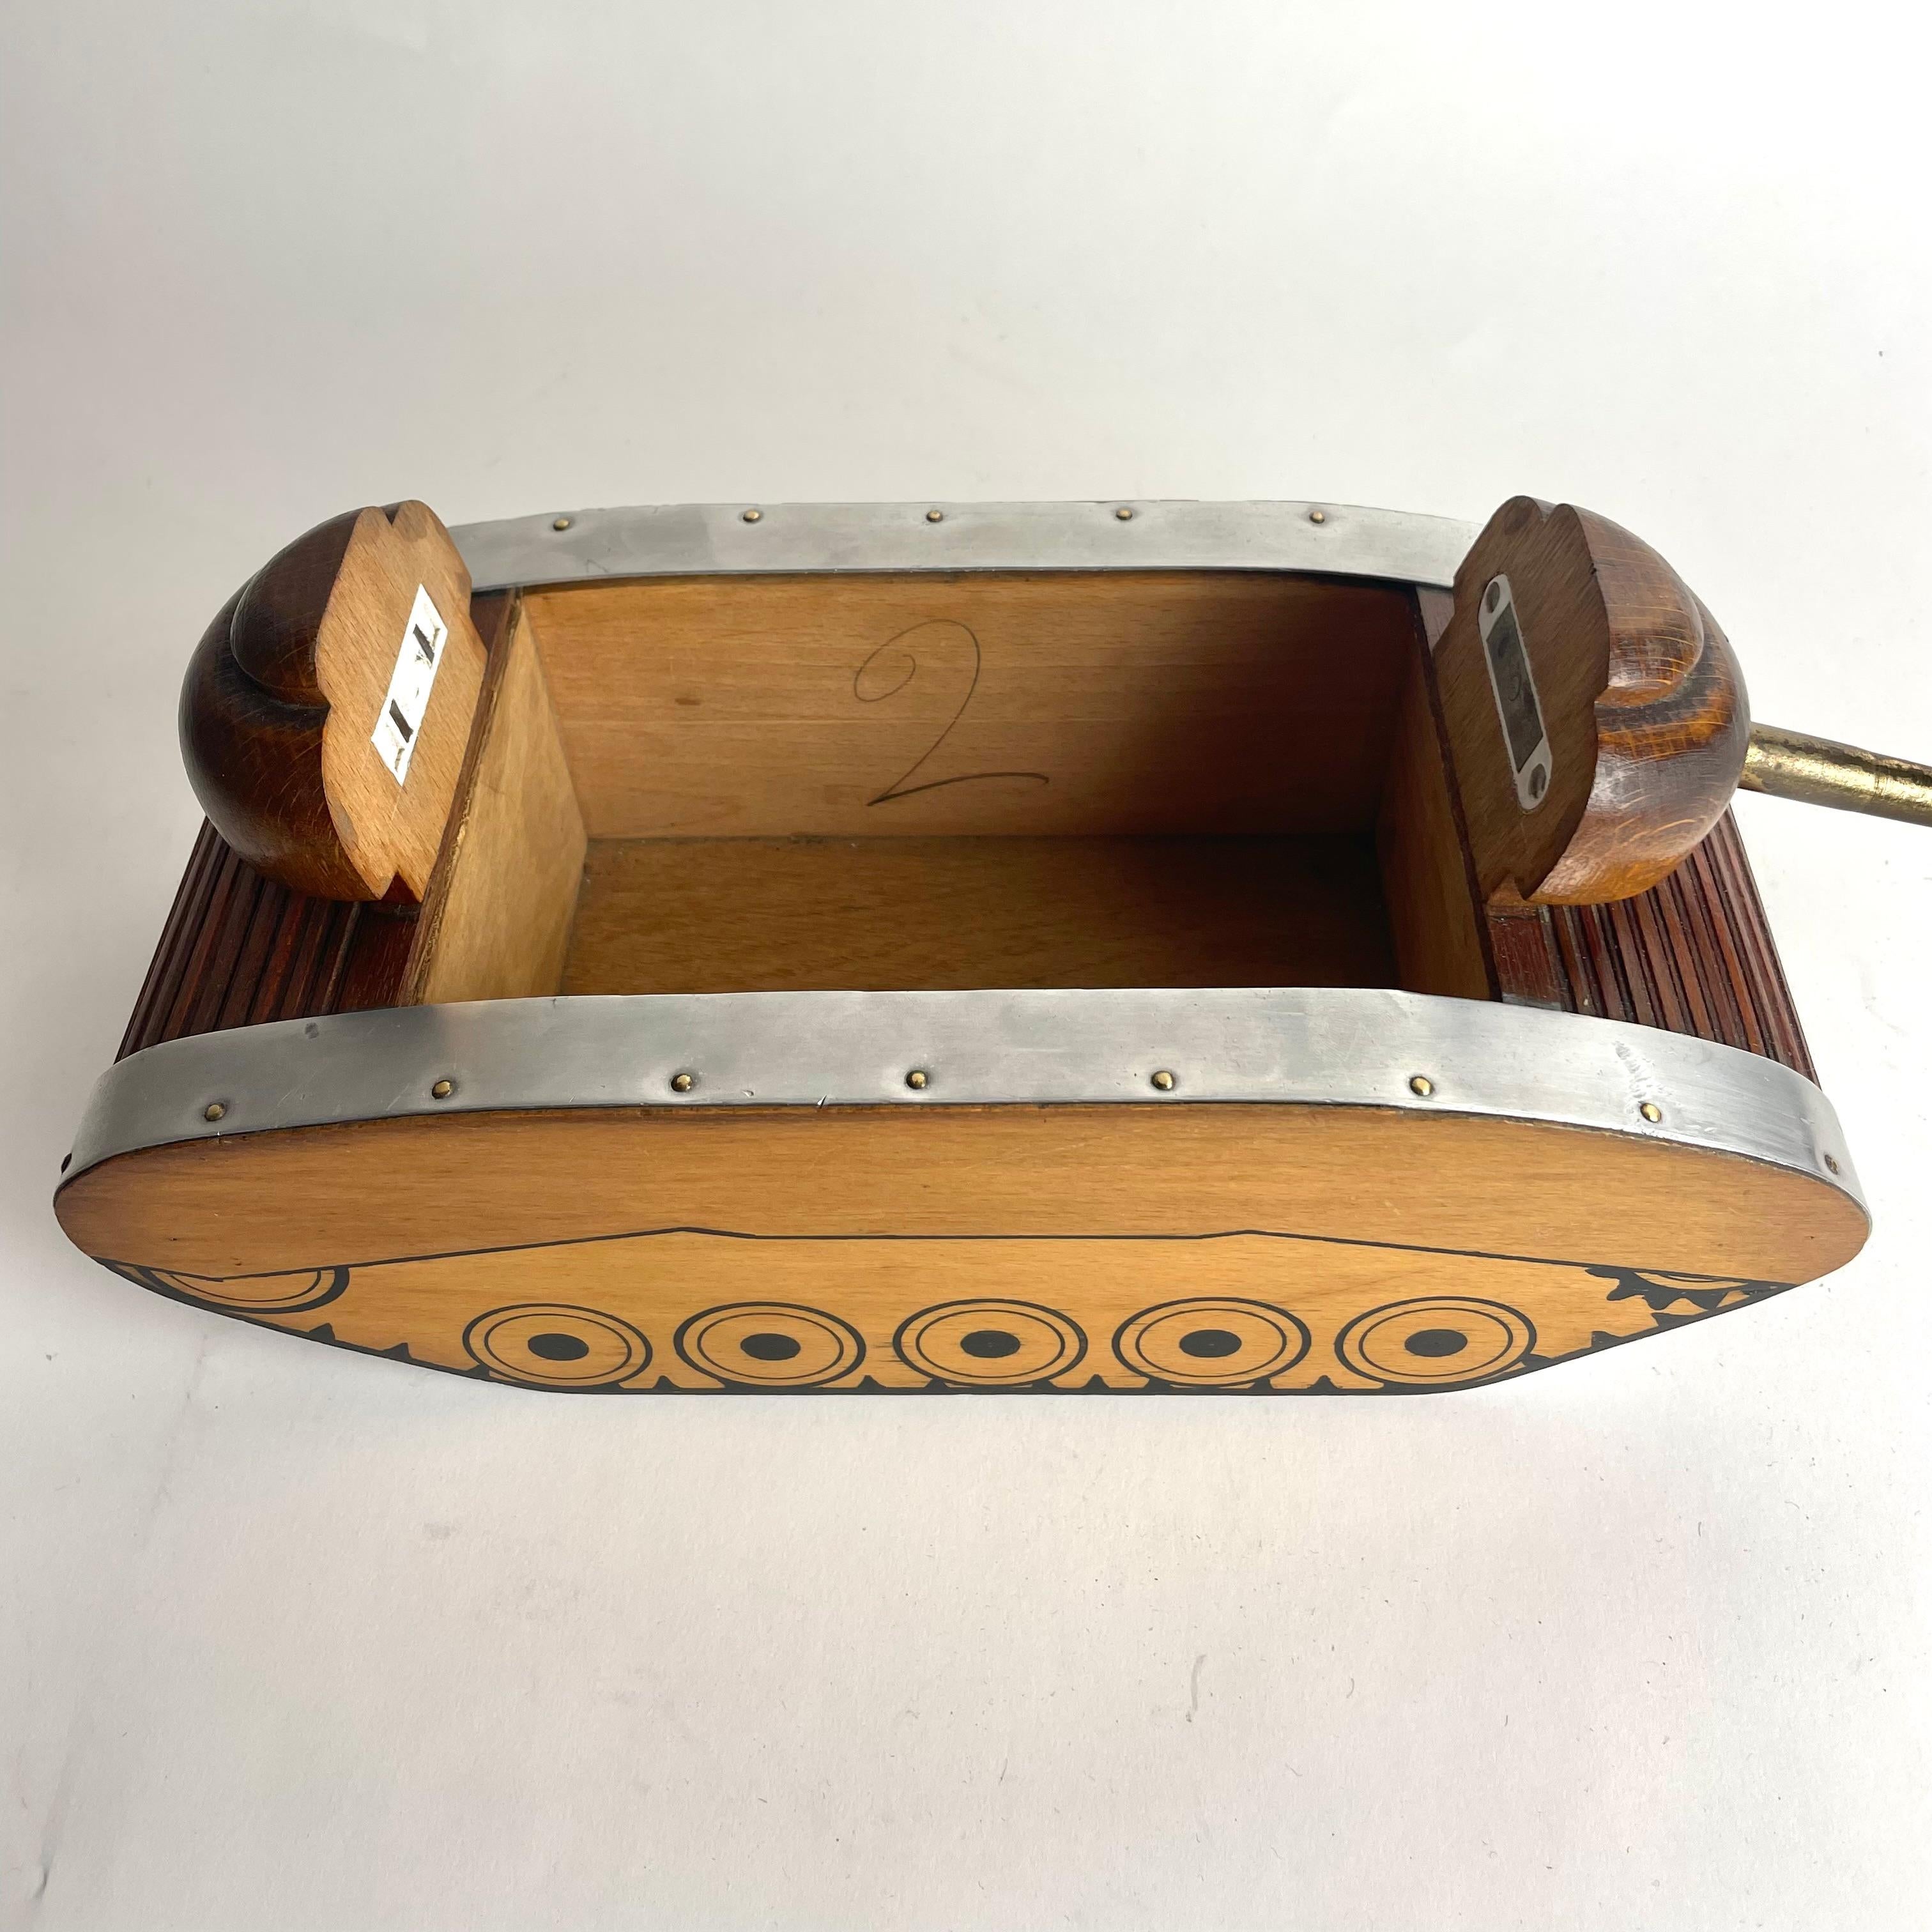 Decorative Cigar or Cigarette Box in the shape of a tank from the 1940s For Sale 2